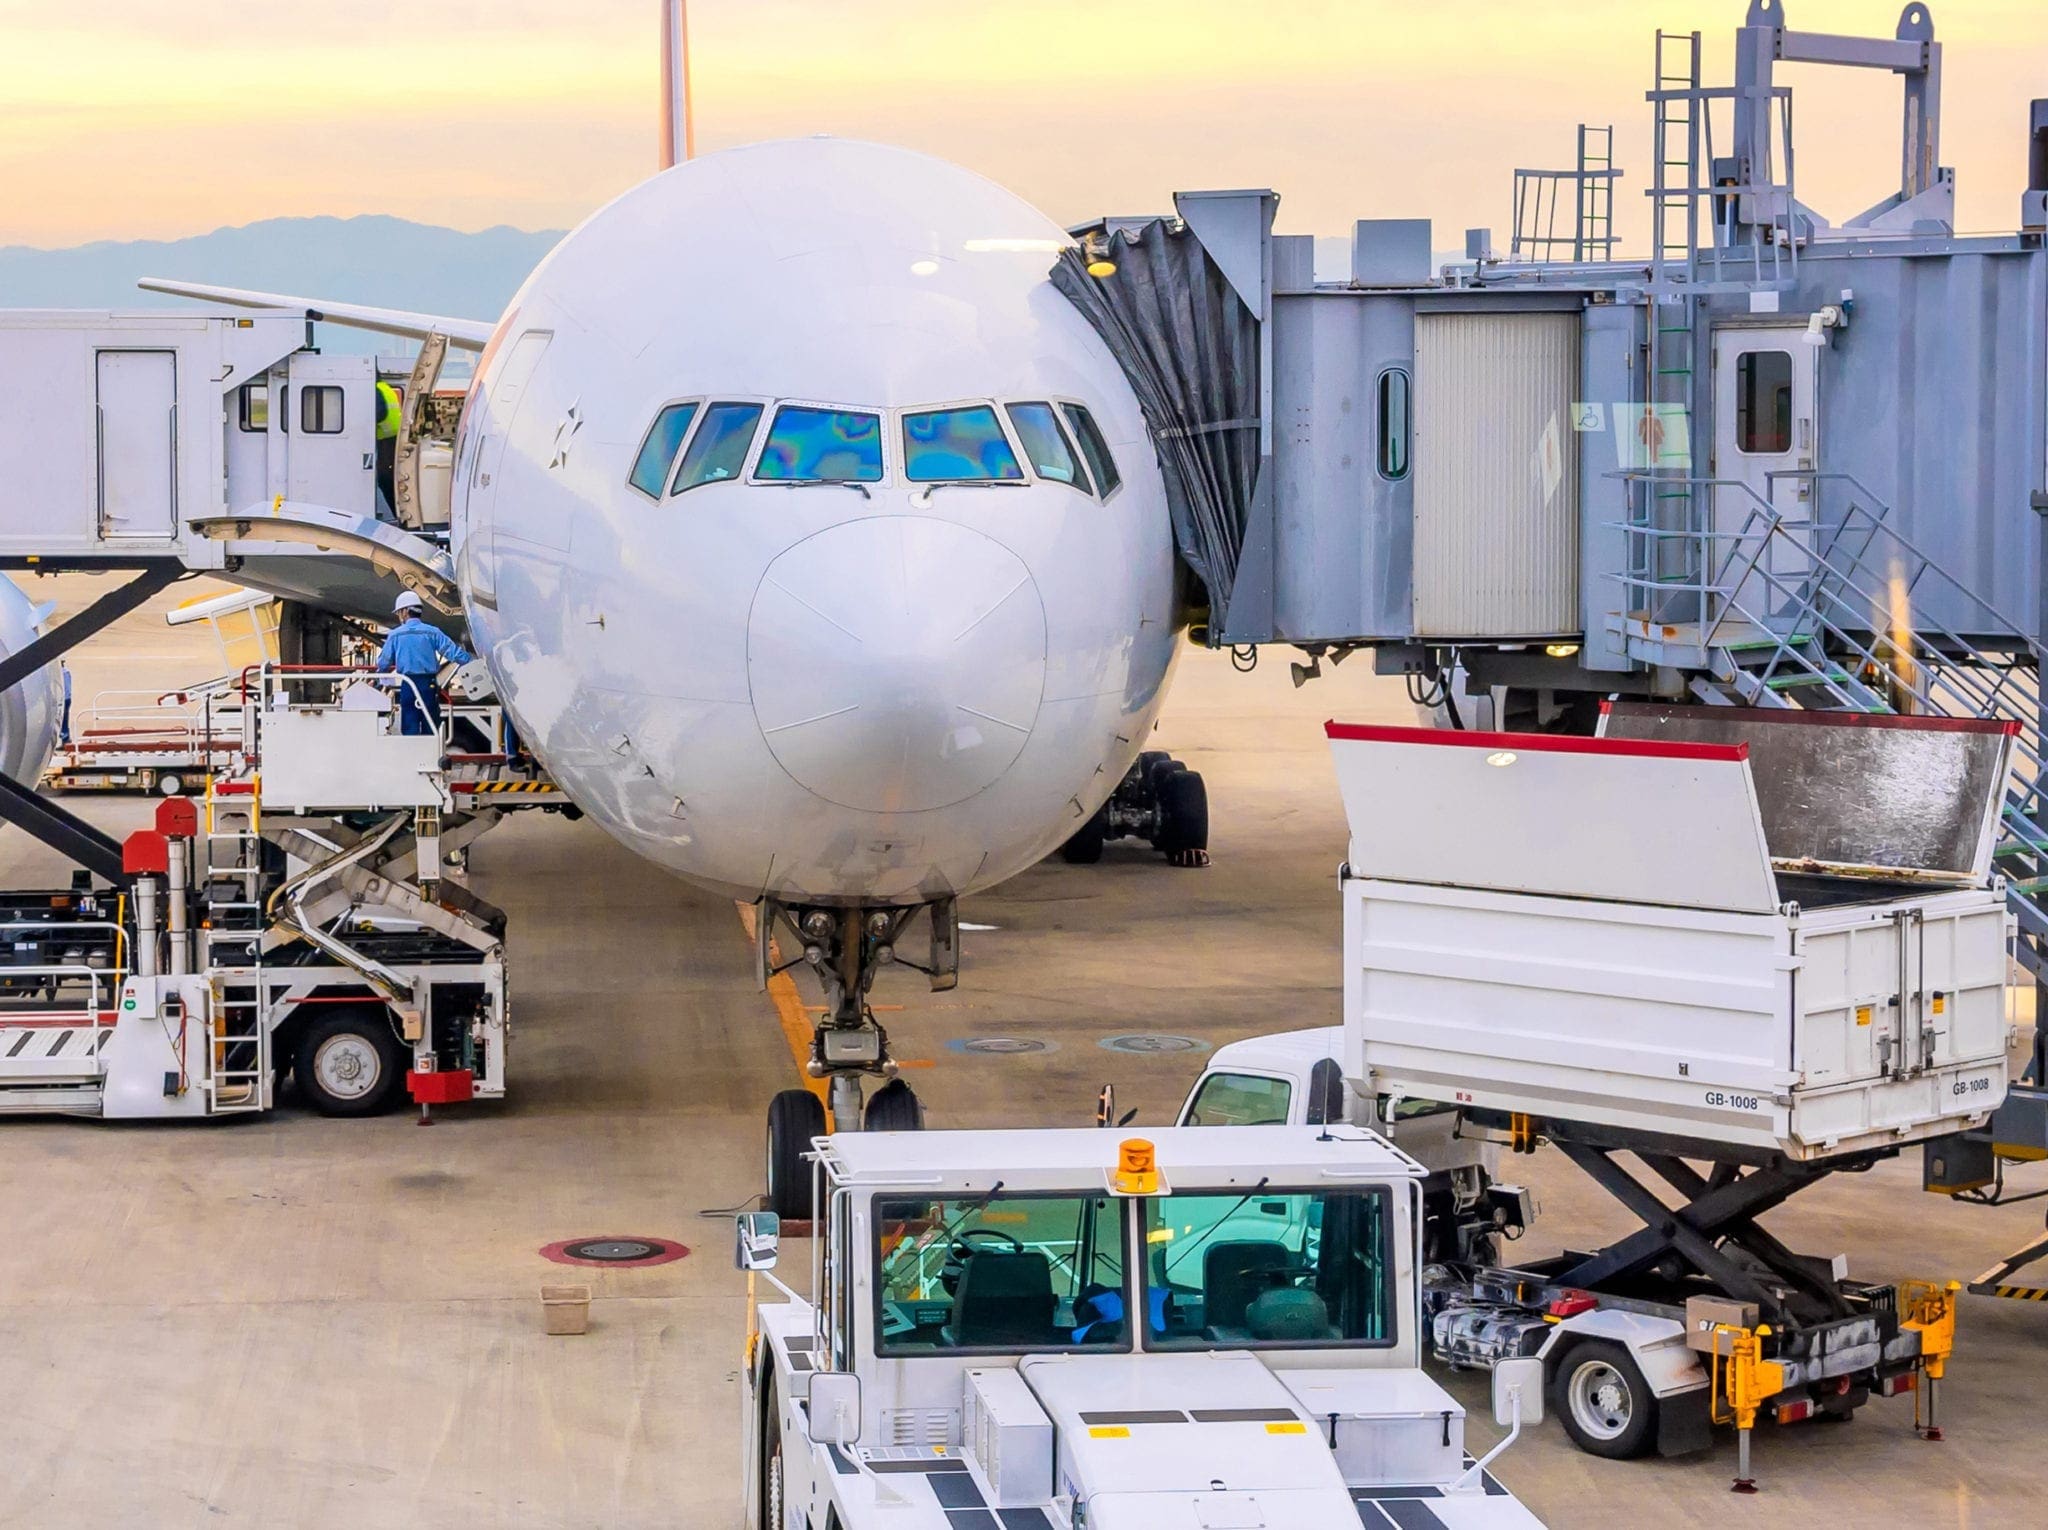 Aviation Services Leader Elevates Global Airport Operations with Orion